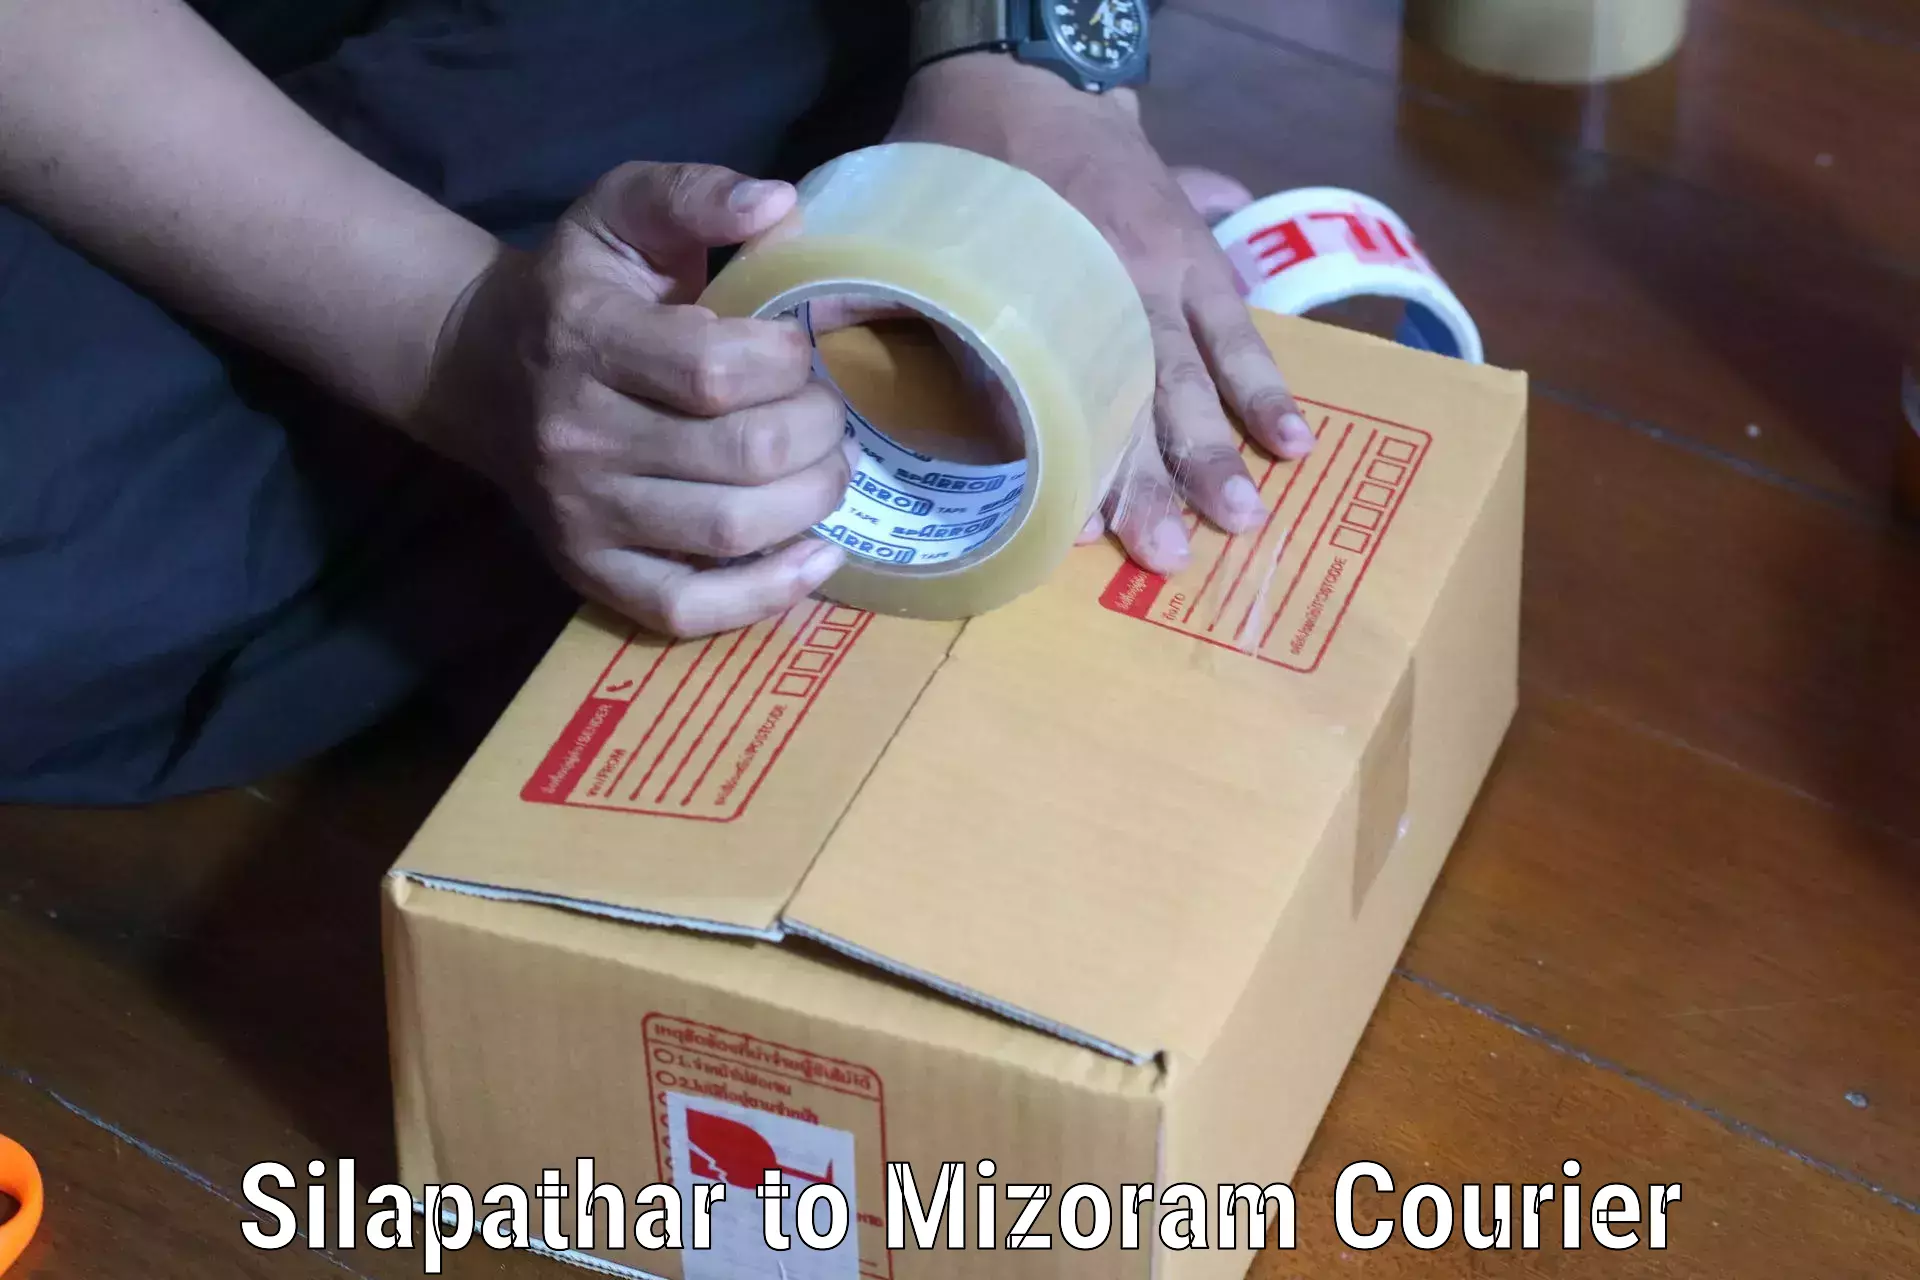 Courier service innovation Silapathar to Aizawl